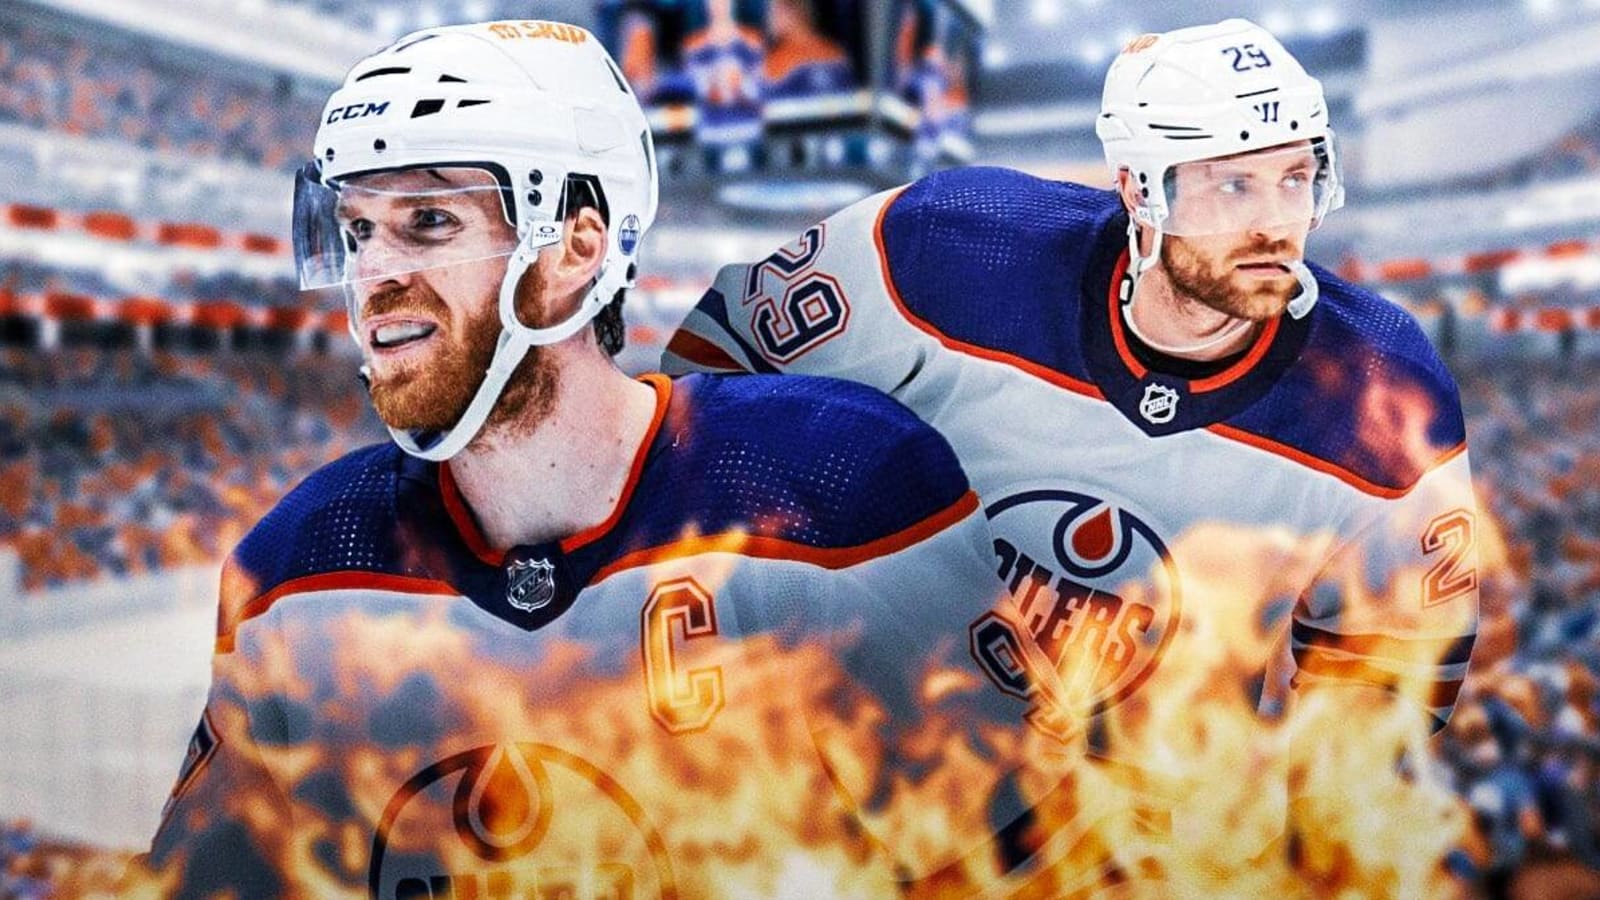 Oilers’ Connor McDavid, Leon Draisaitl receive major praise from Canucks coach after combining for 8 points in Game 2 win